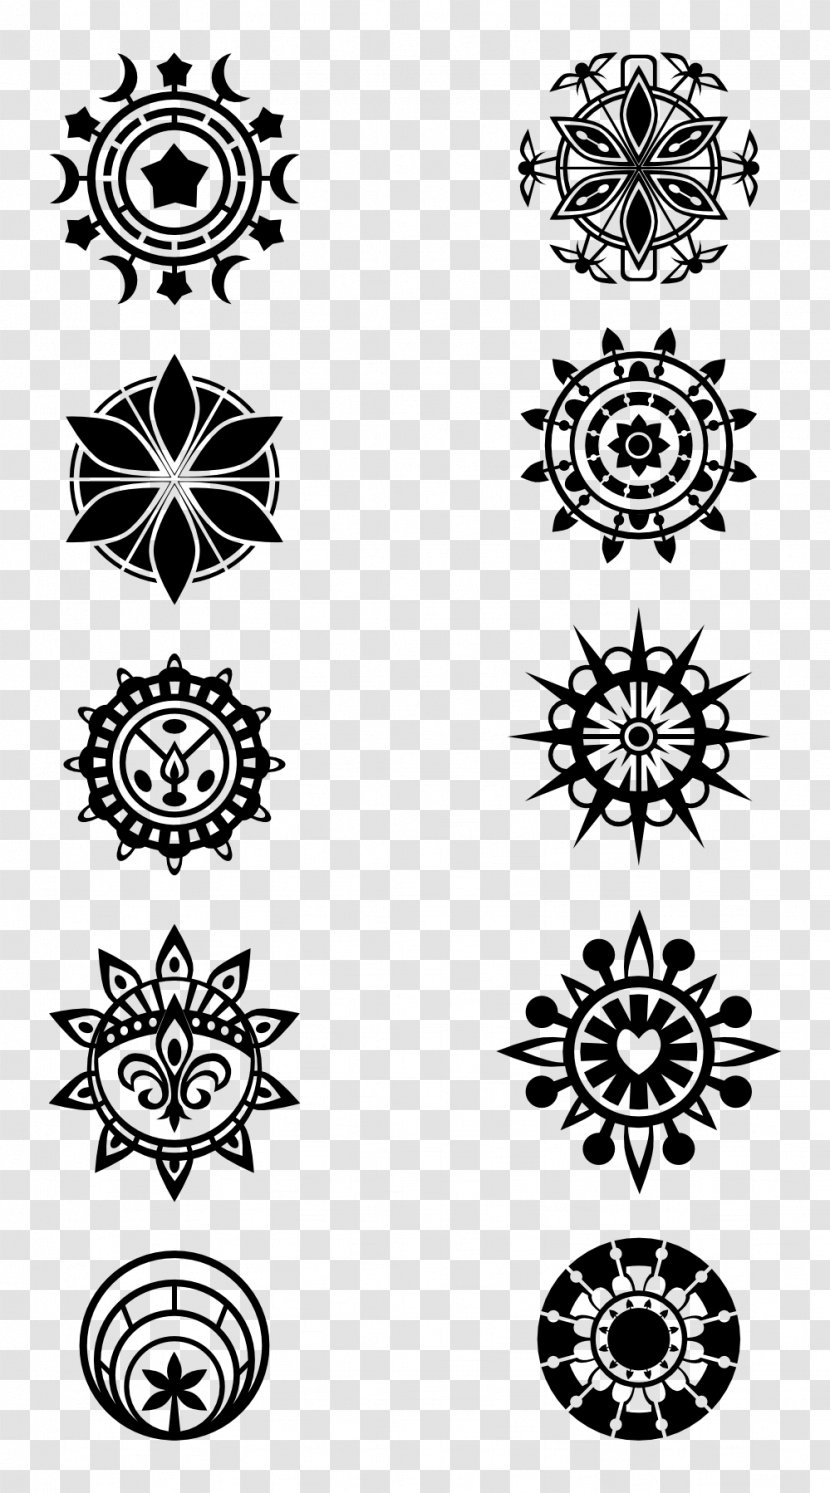 Black And White Flower - Ornament Transparent PNG